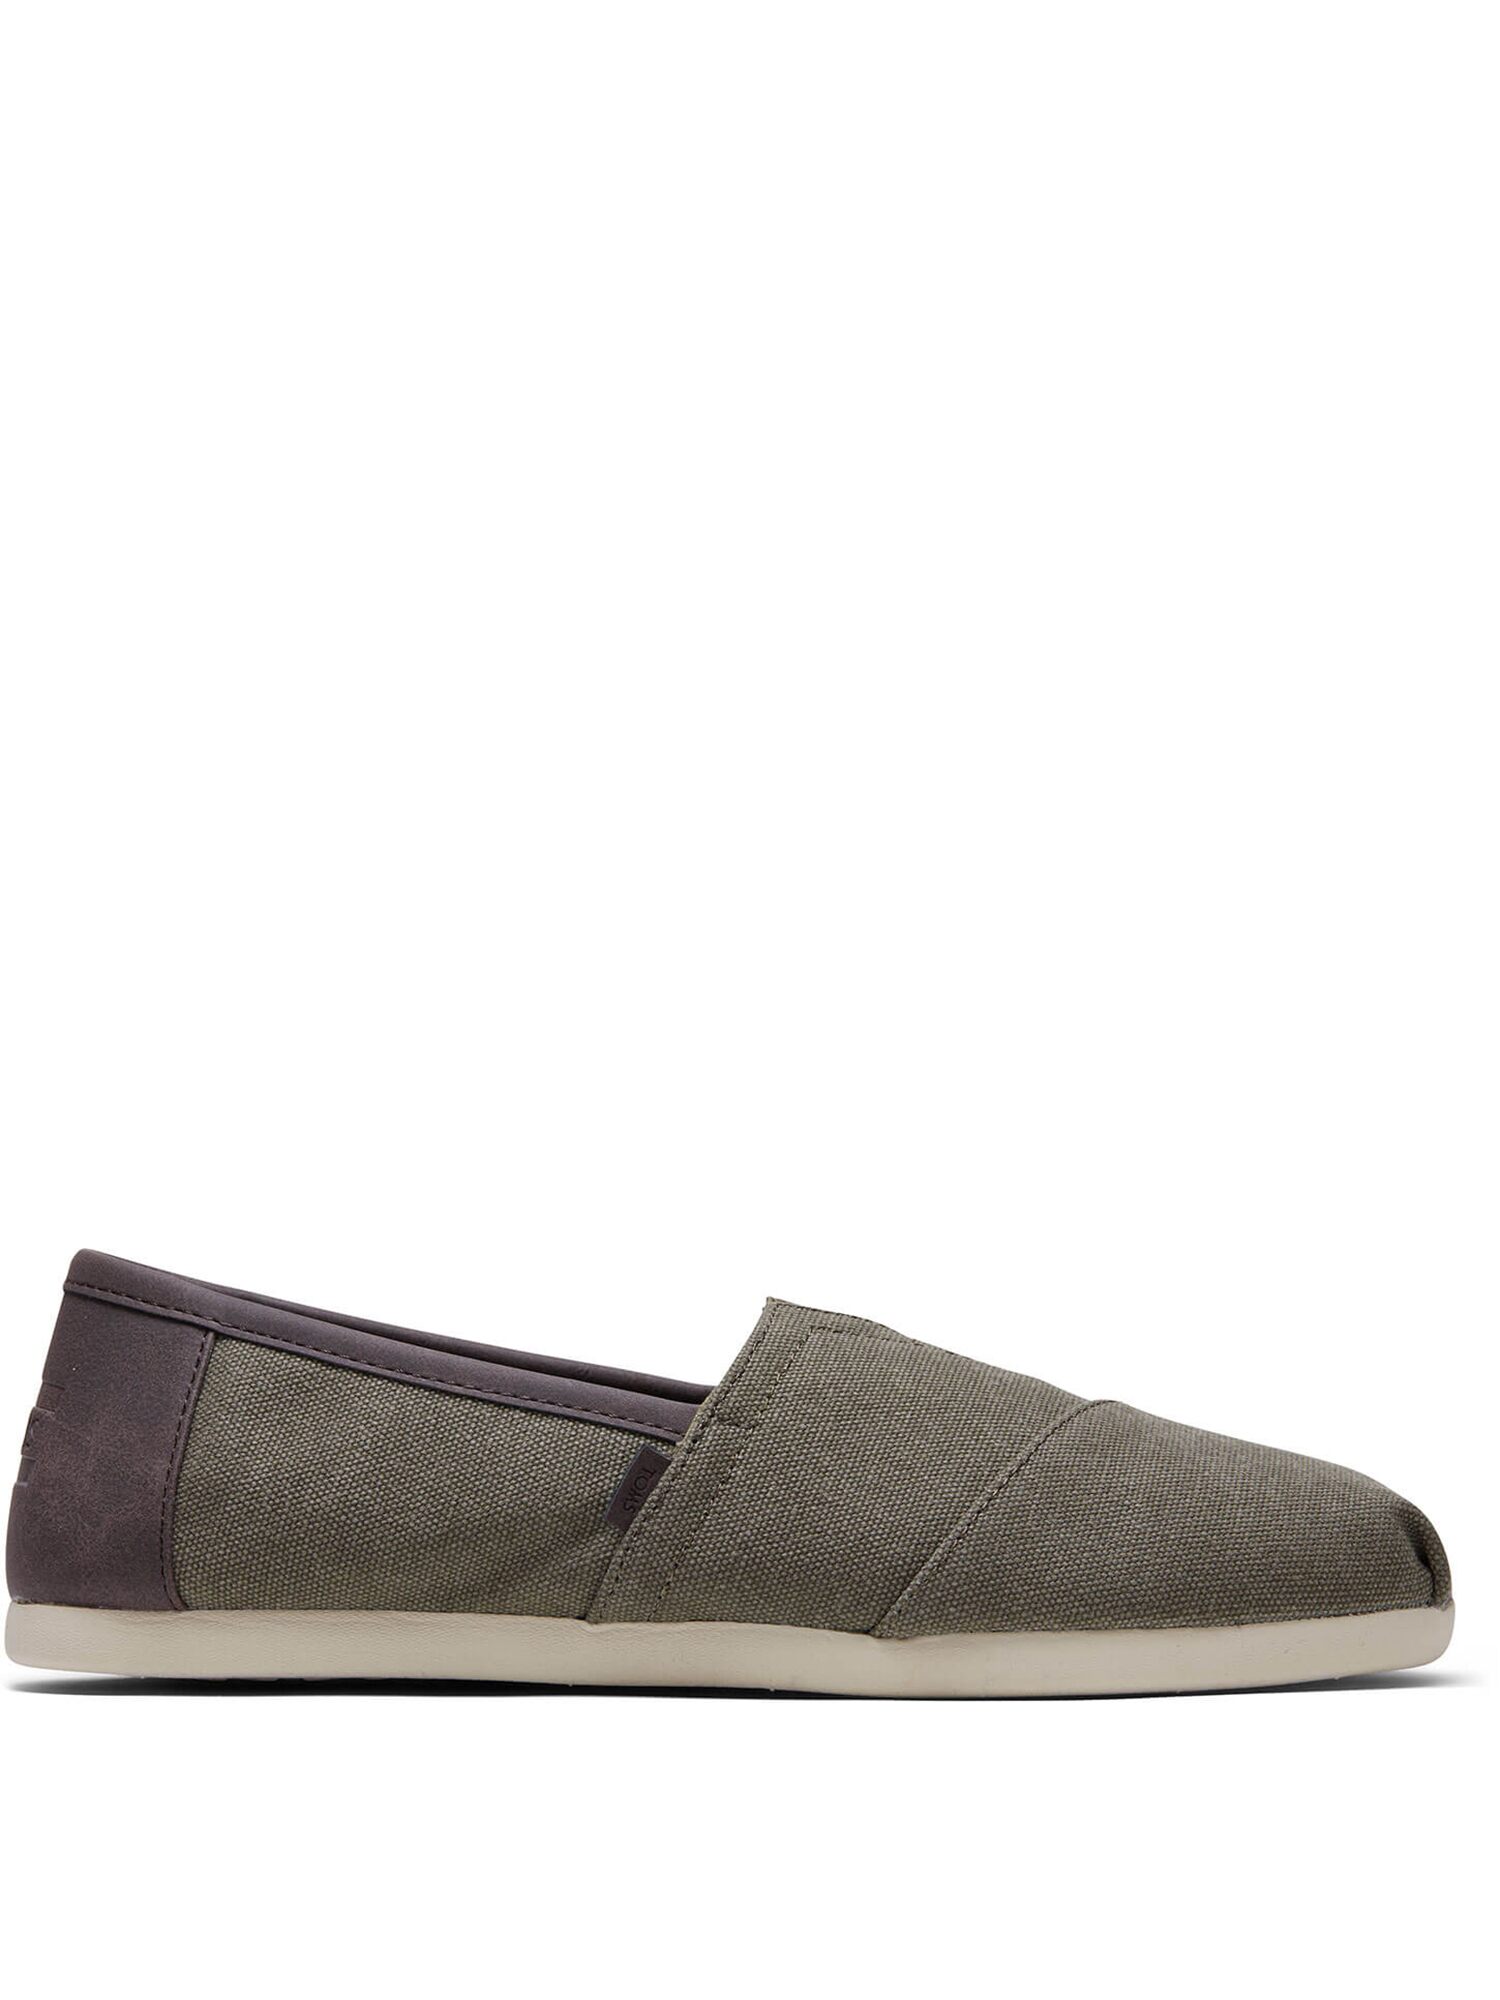 TOMS Men's Washed Canvas Classic Slip-On Shoes ft. Ortholite - image 1 of 4